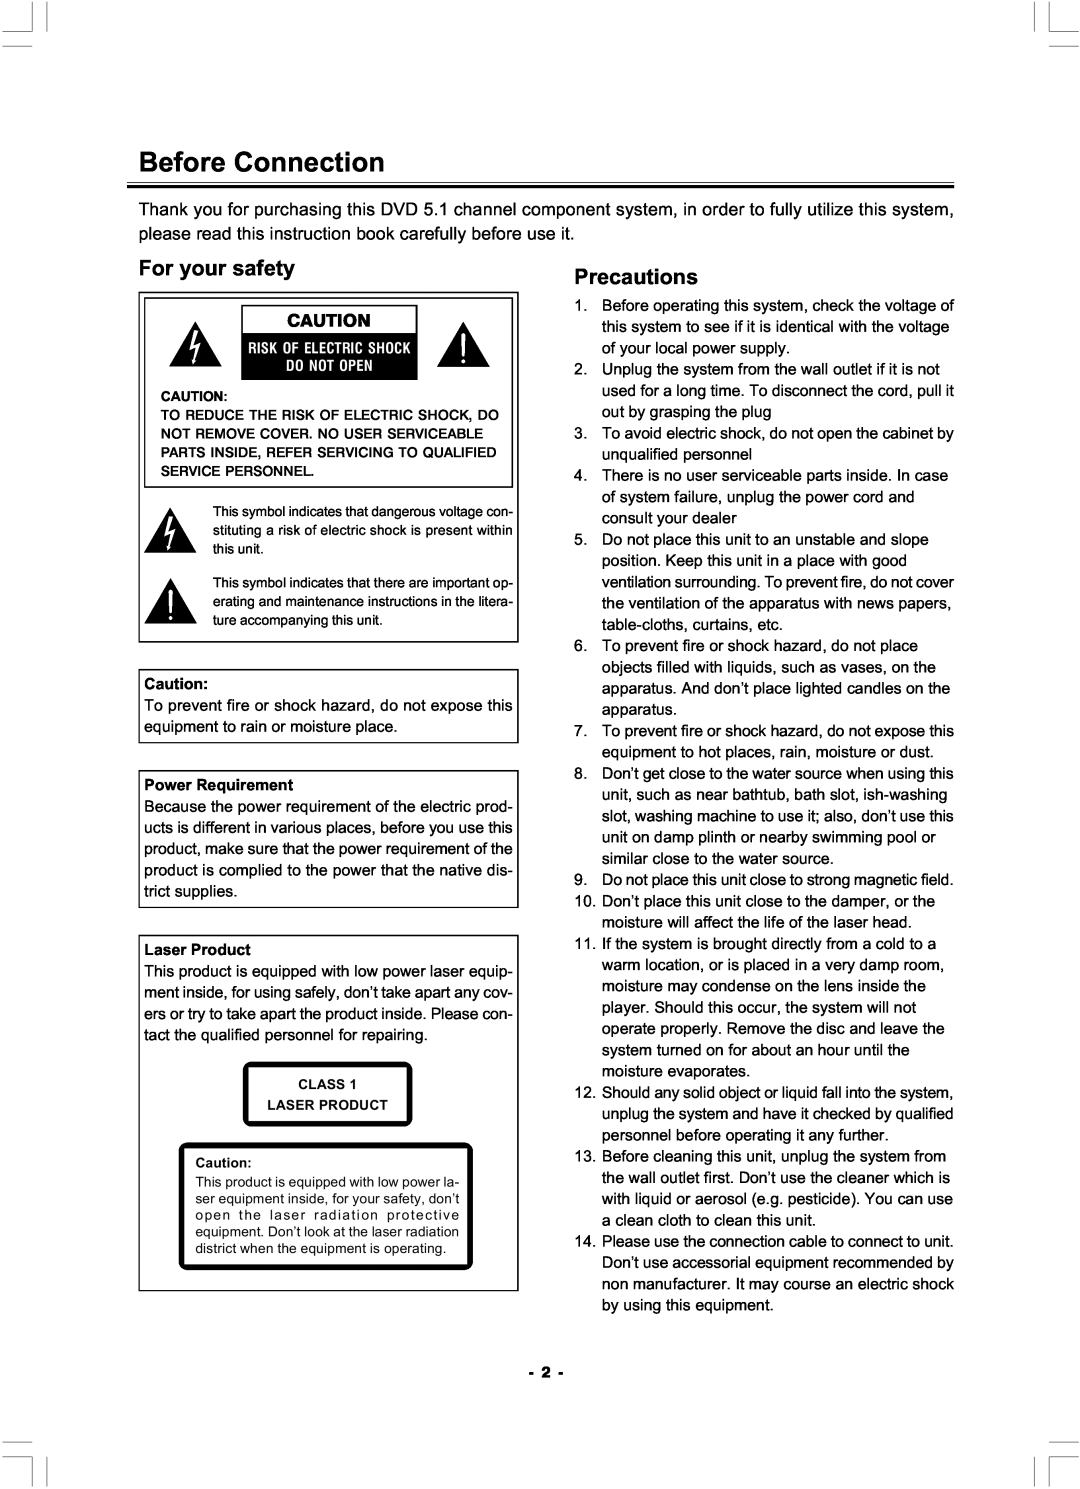 Hyundai H-MS1100 manual Before Connection, For your safety, Precautions 